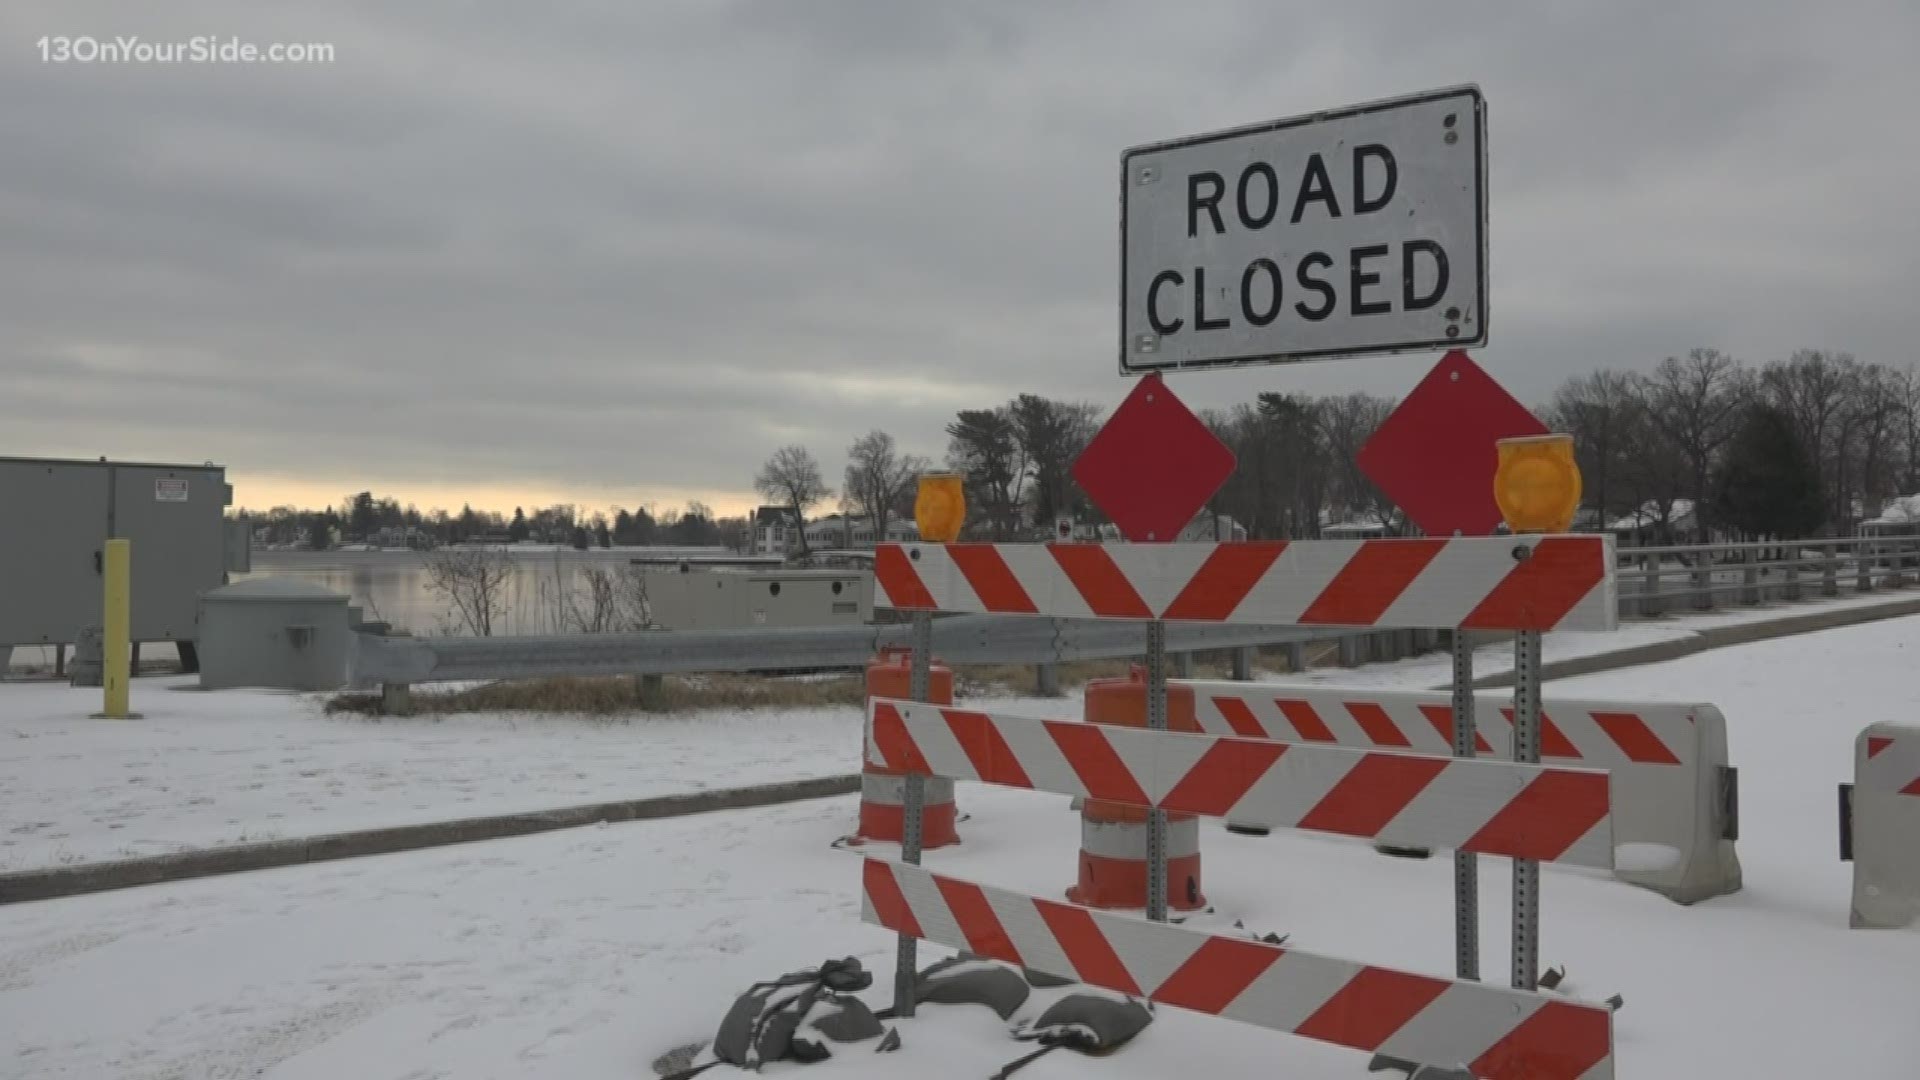 City Manager Craig Bessinger said the decision to reopen the bridge or not will ultimately rest with the City Council.